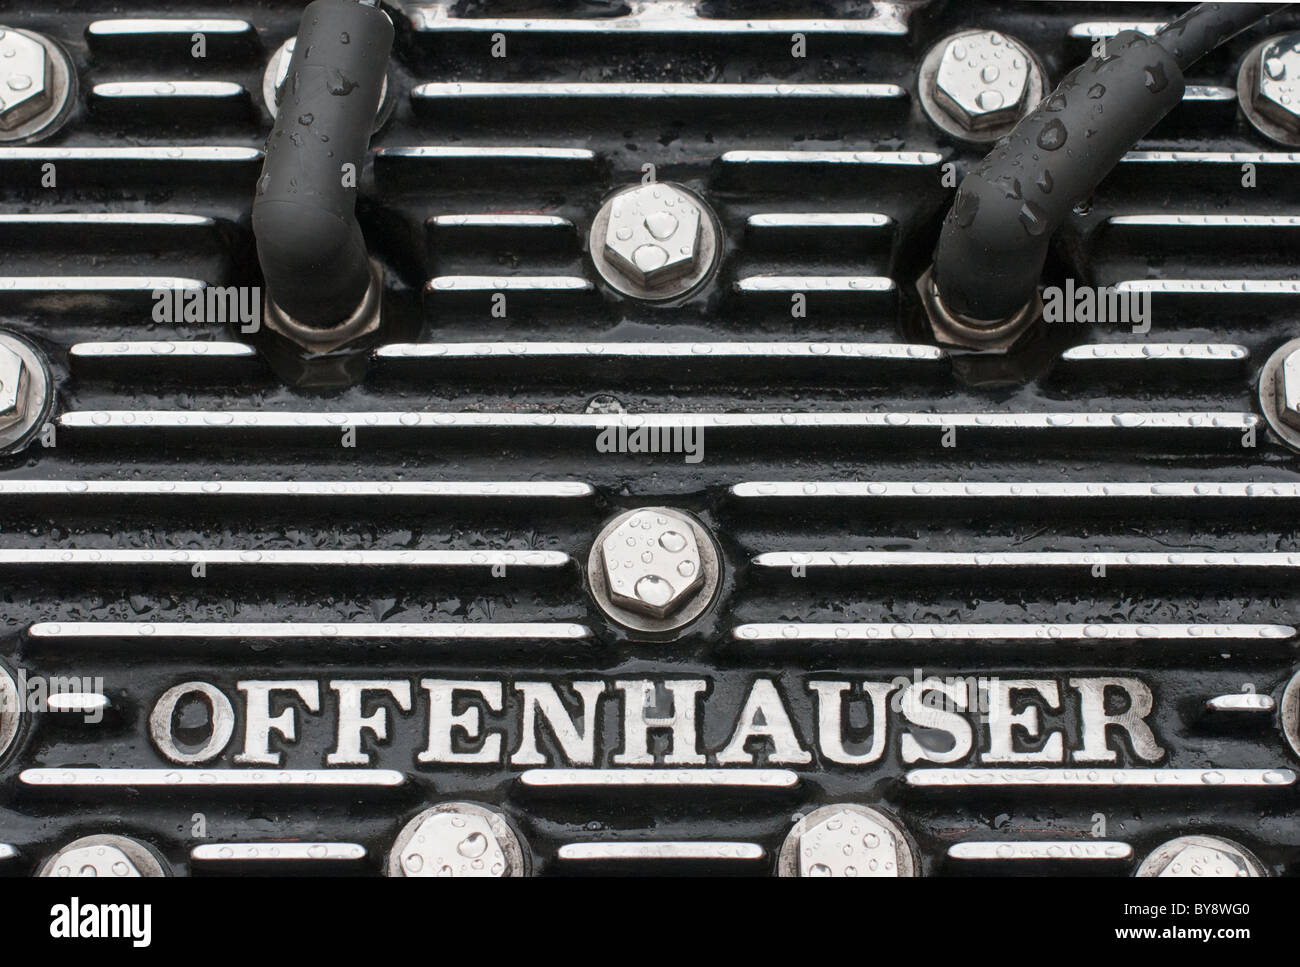 A close up of the top of a 4-cylinder Offenhauser racing engine in a classic American Miller racing car. Stock Photo